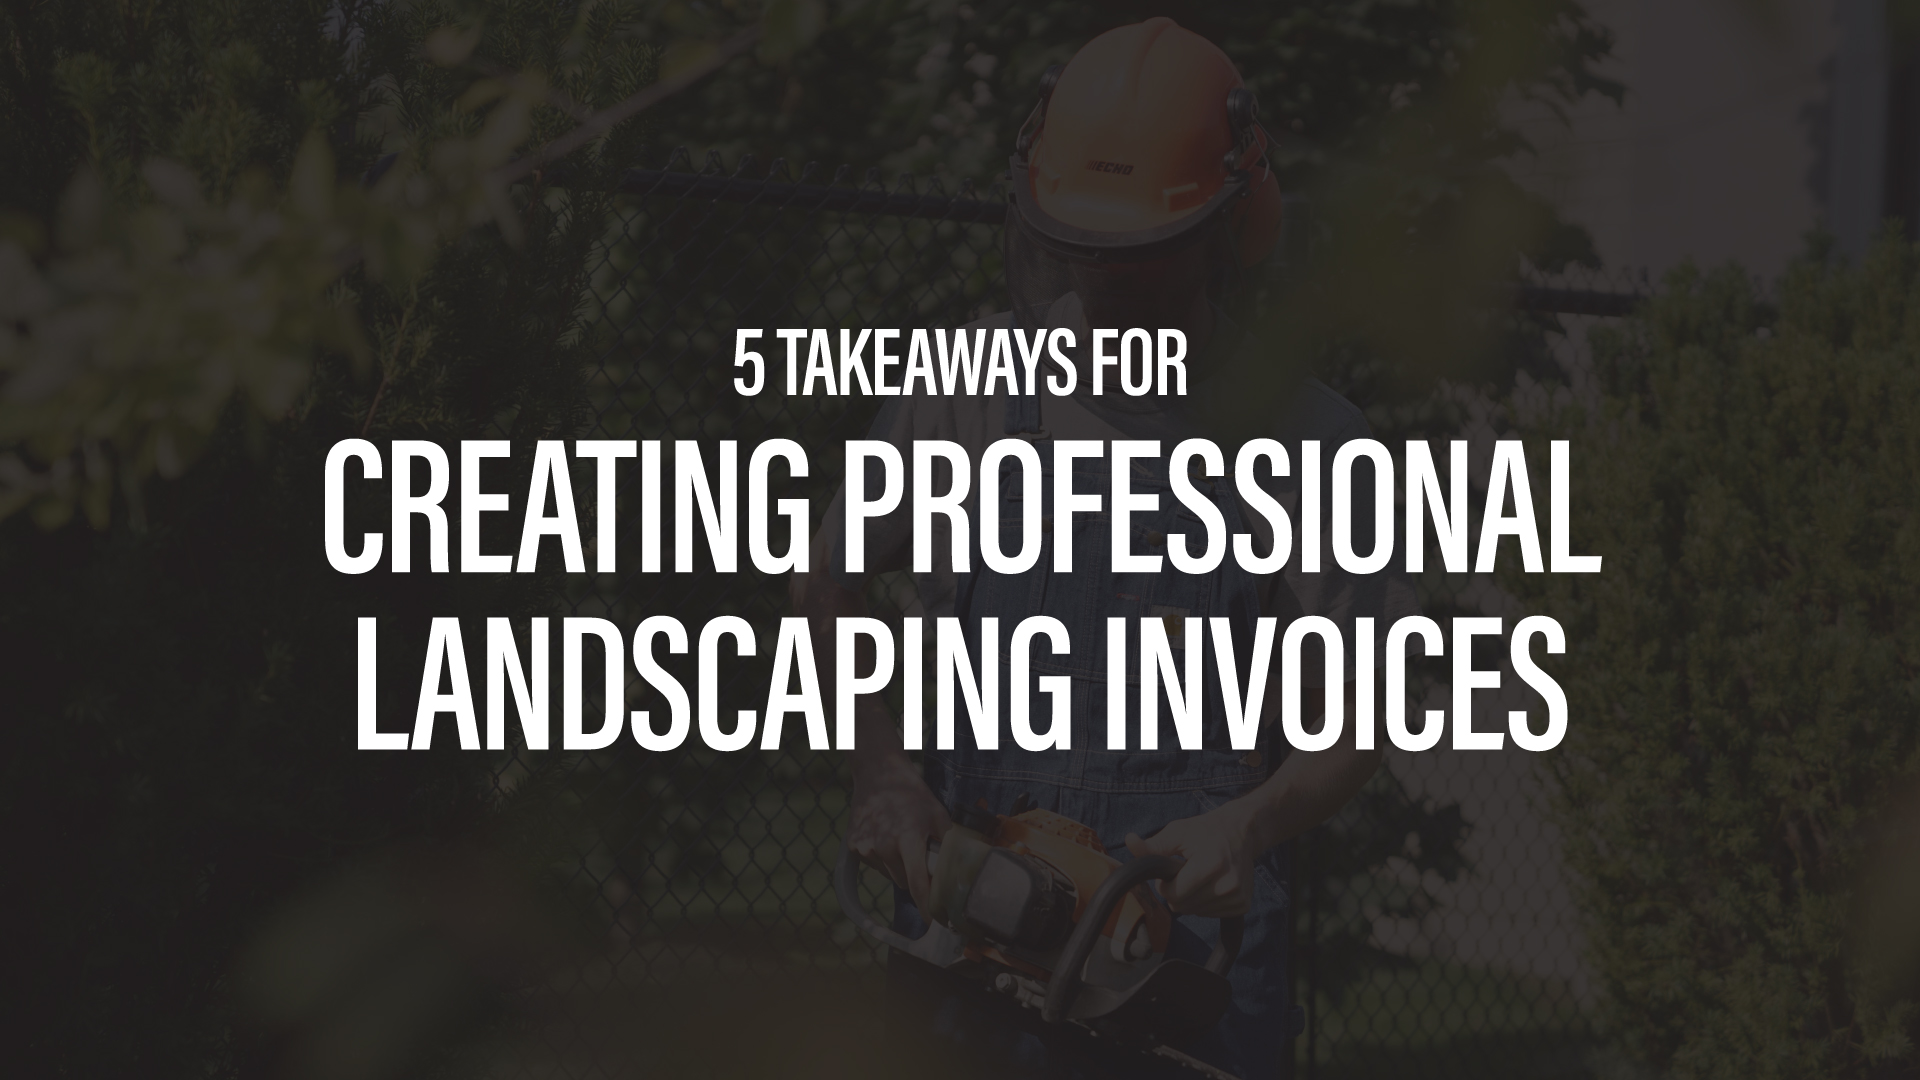 creating landscaping invoices|